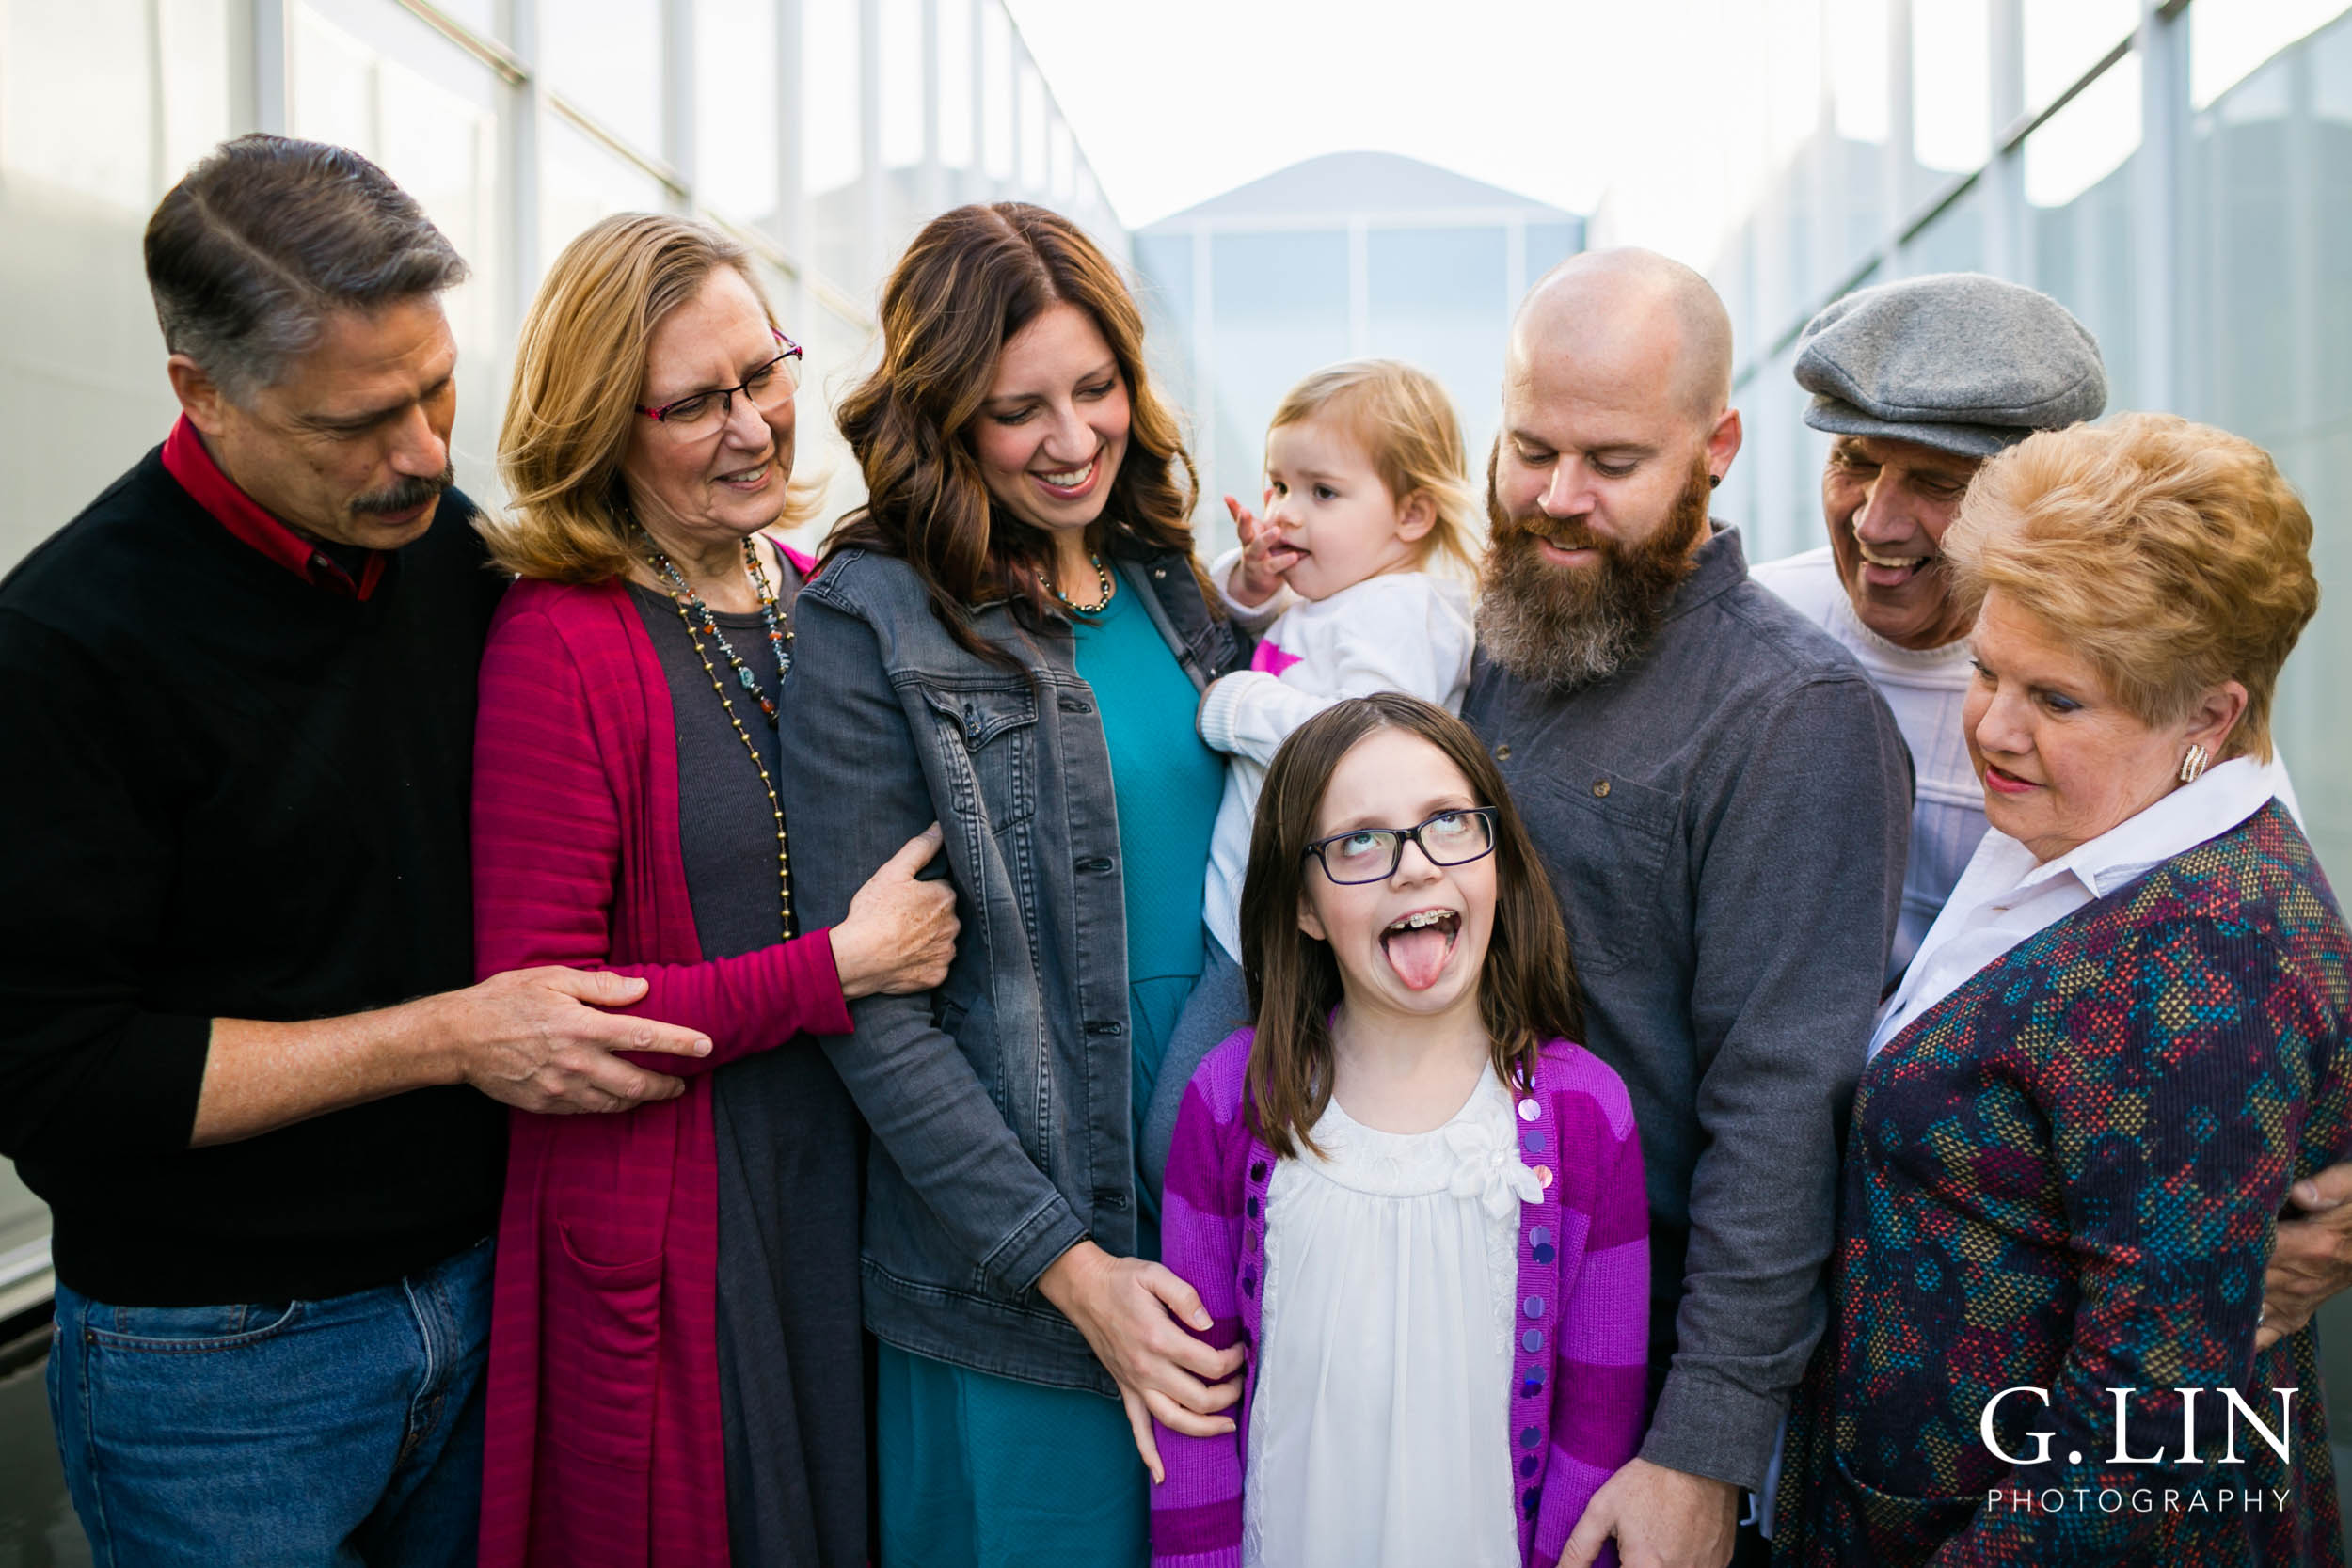 Raleigh Family Photographer | G. Lin Photography |  Girl making a silly face for family session